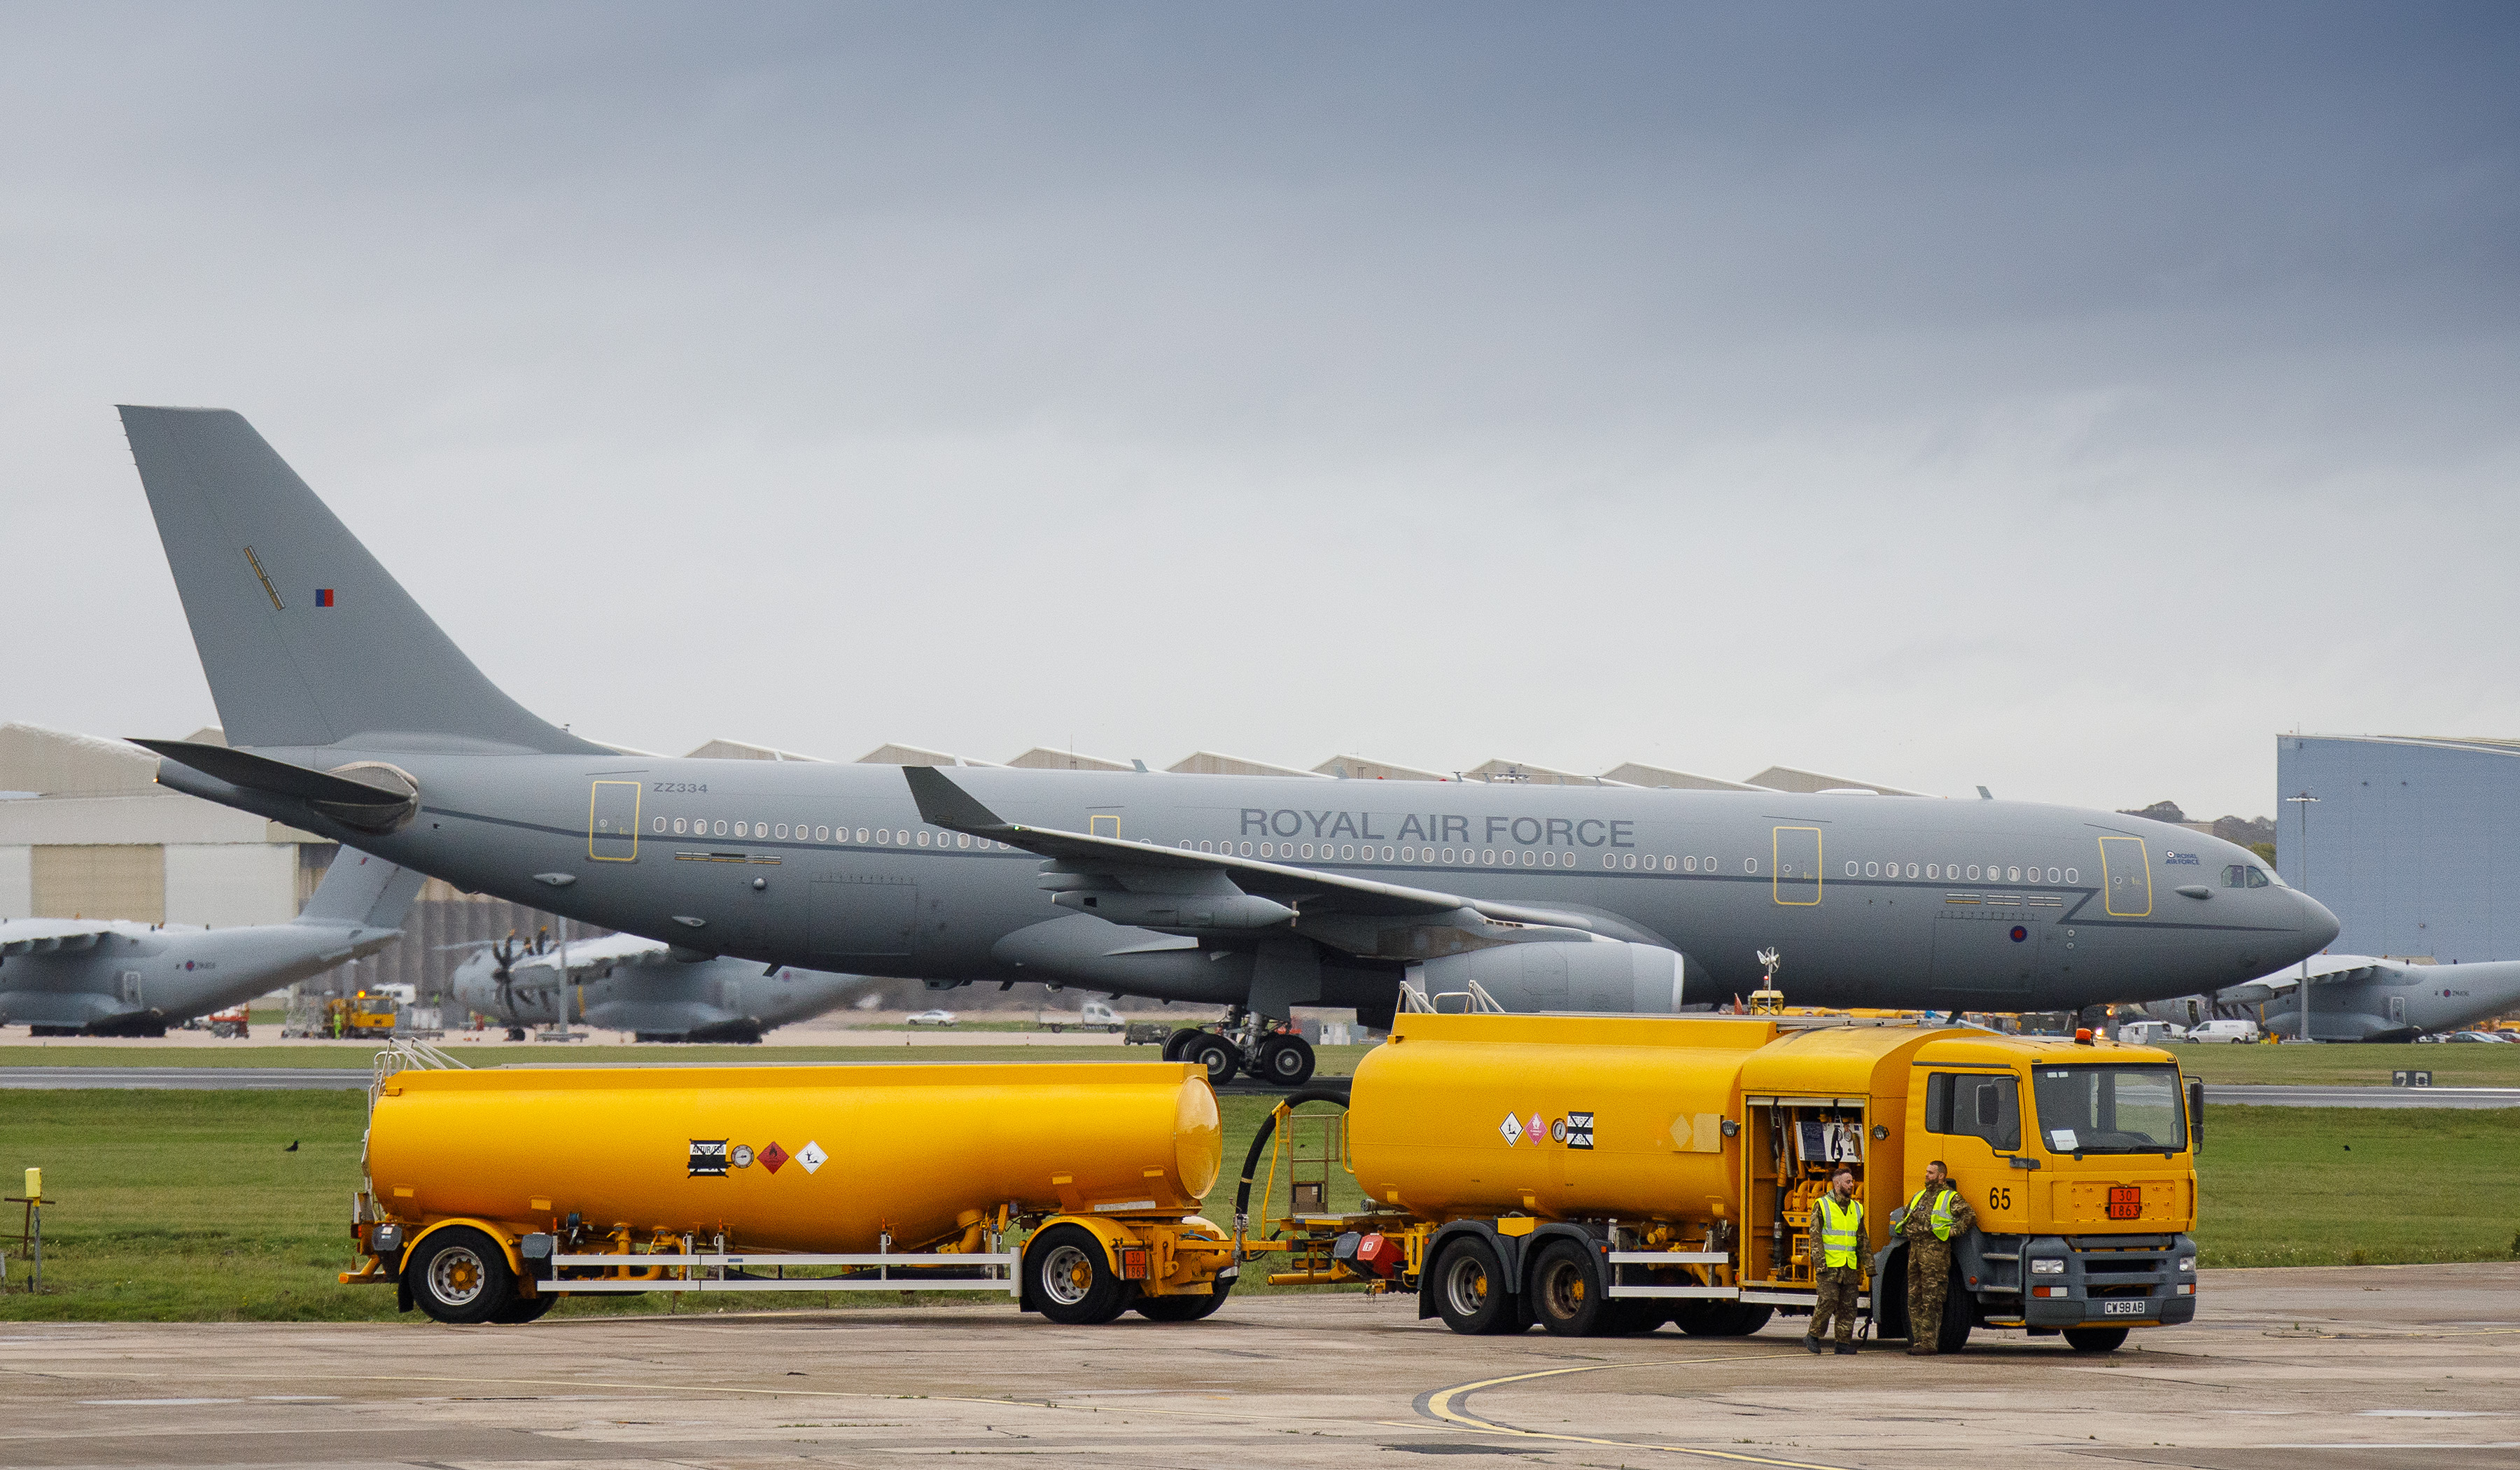 Image shows an RAF Voyager aircraft with fuel trucks in the foreground.